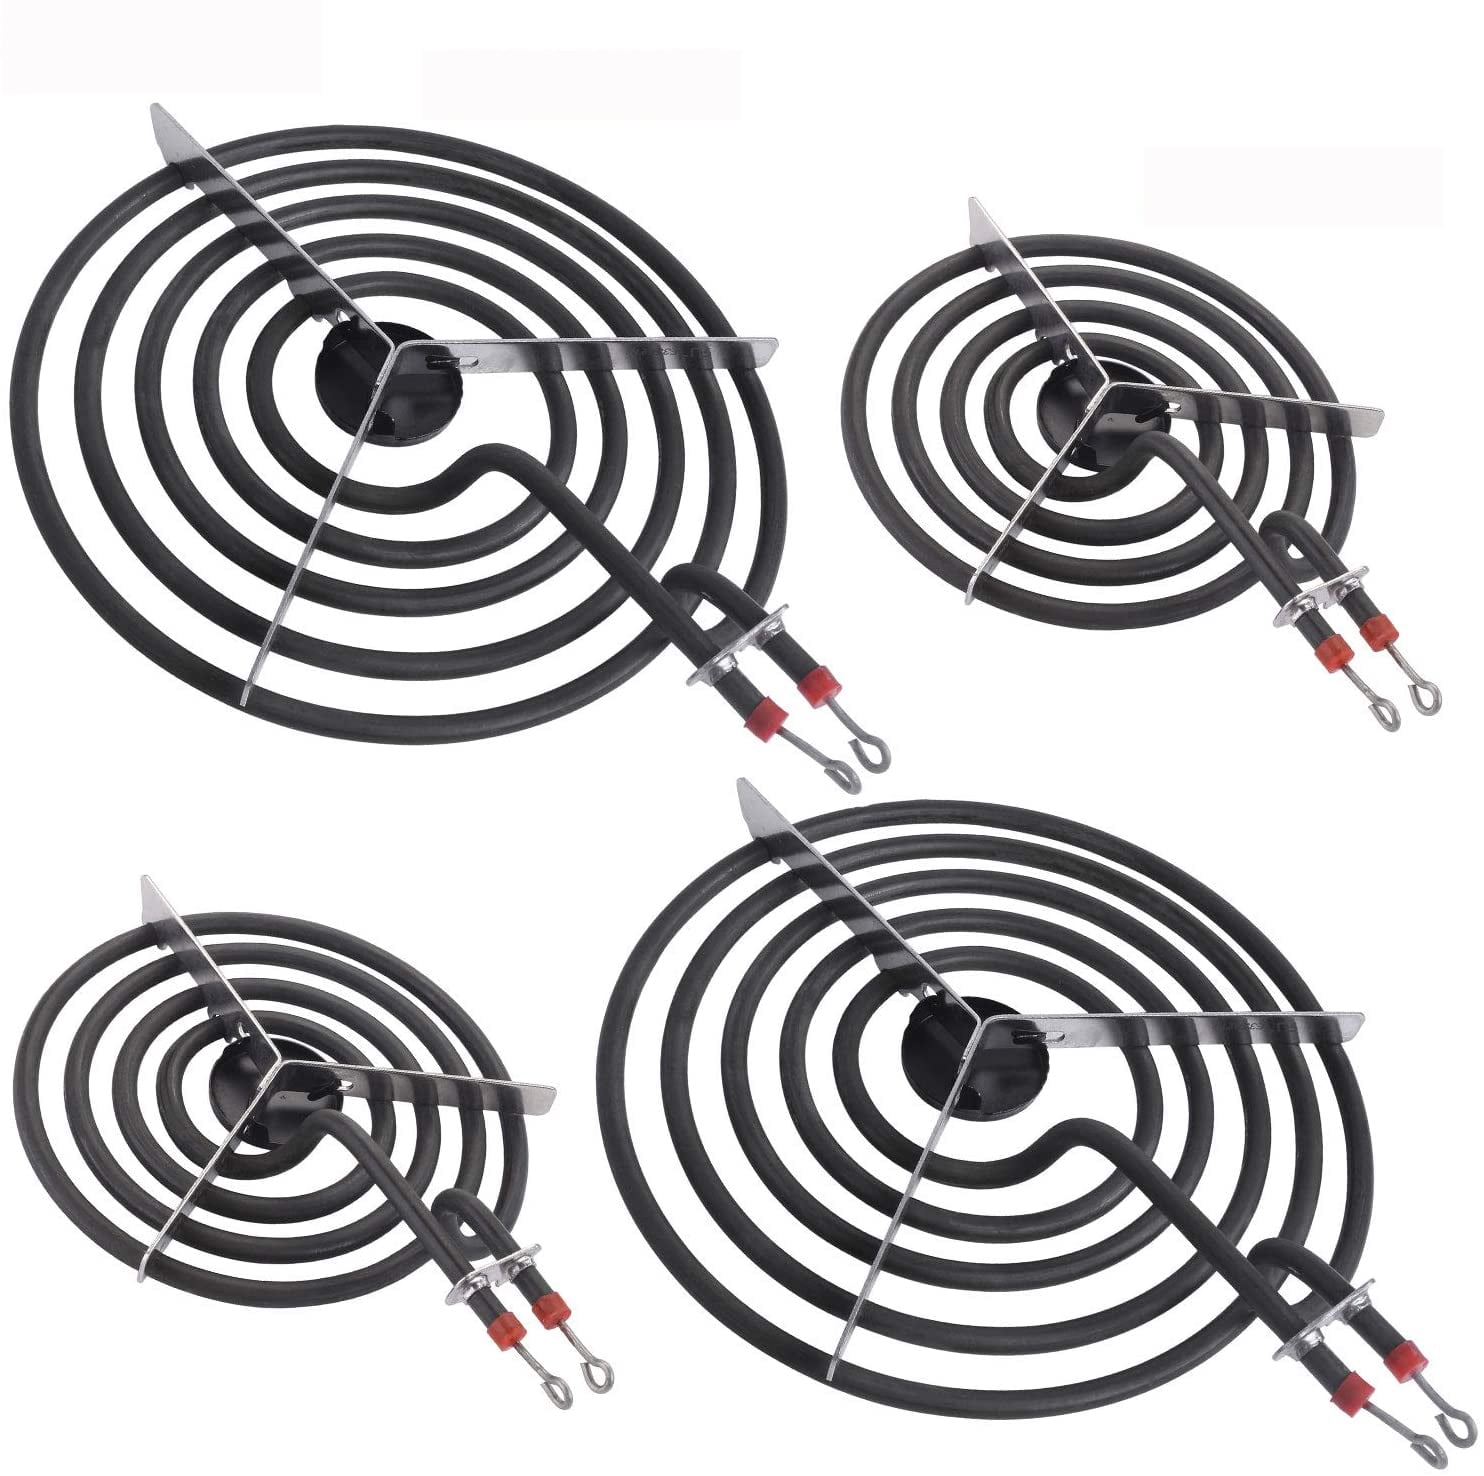 Replacement for Kenmore Whirlpool Maytag Hardwick Jenn Air Norge Ranges/Stoves MP22YA Electric Range Burner Element Unit Set by Beaquicy Package Include 2 pcs MP15YA 6 and 2 pcs MP21YA 8